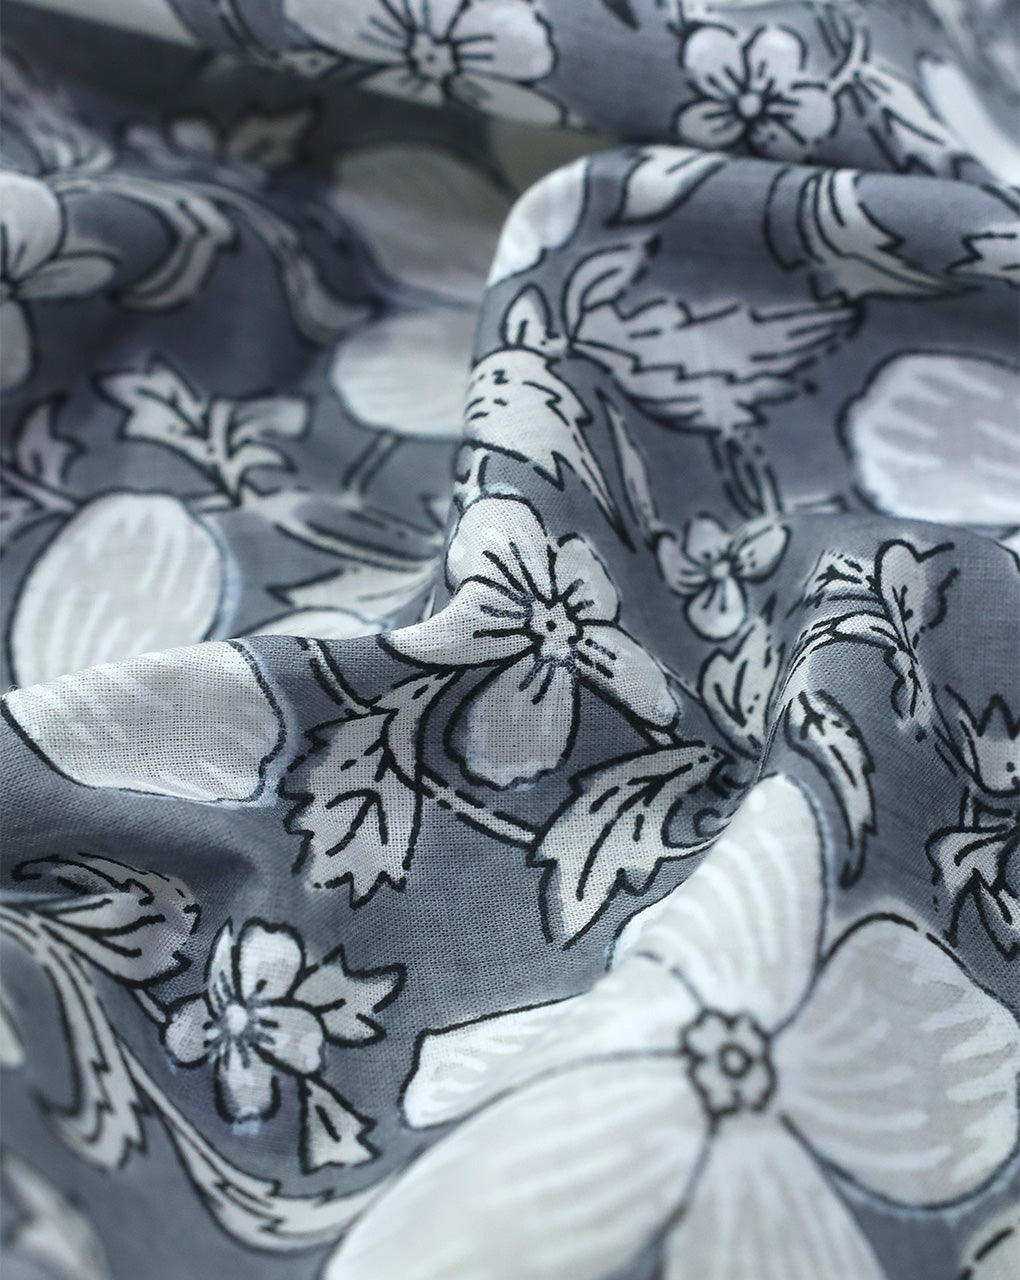 GREY & WHITE FLORAL DESIGN COTTON PRINTED FABRIC